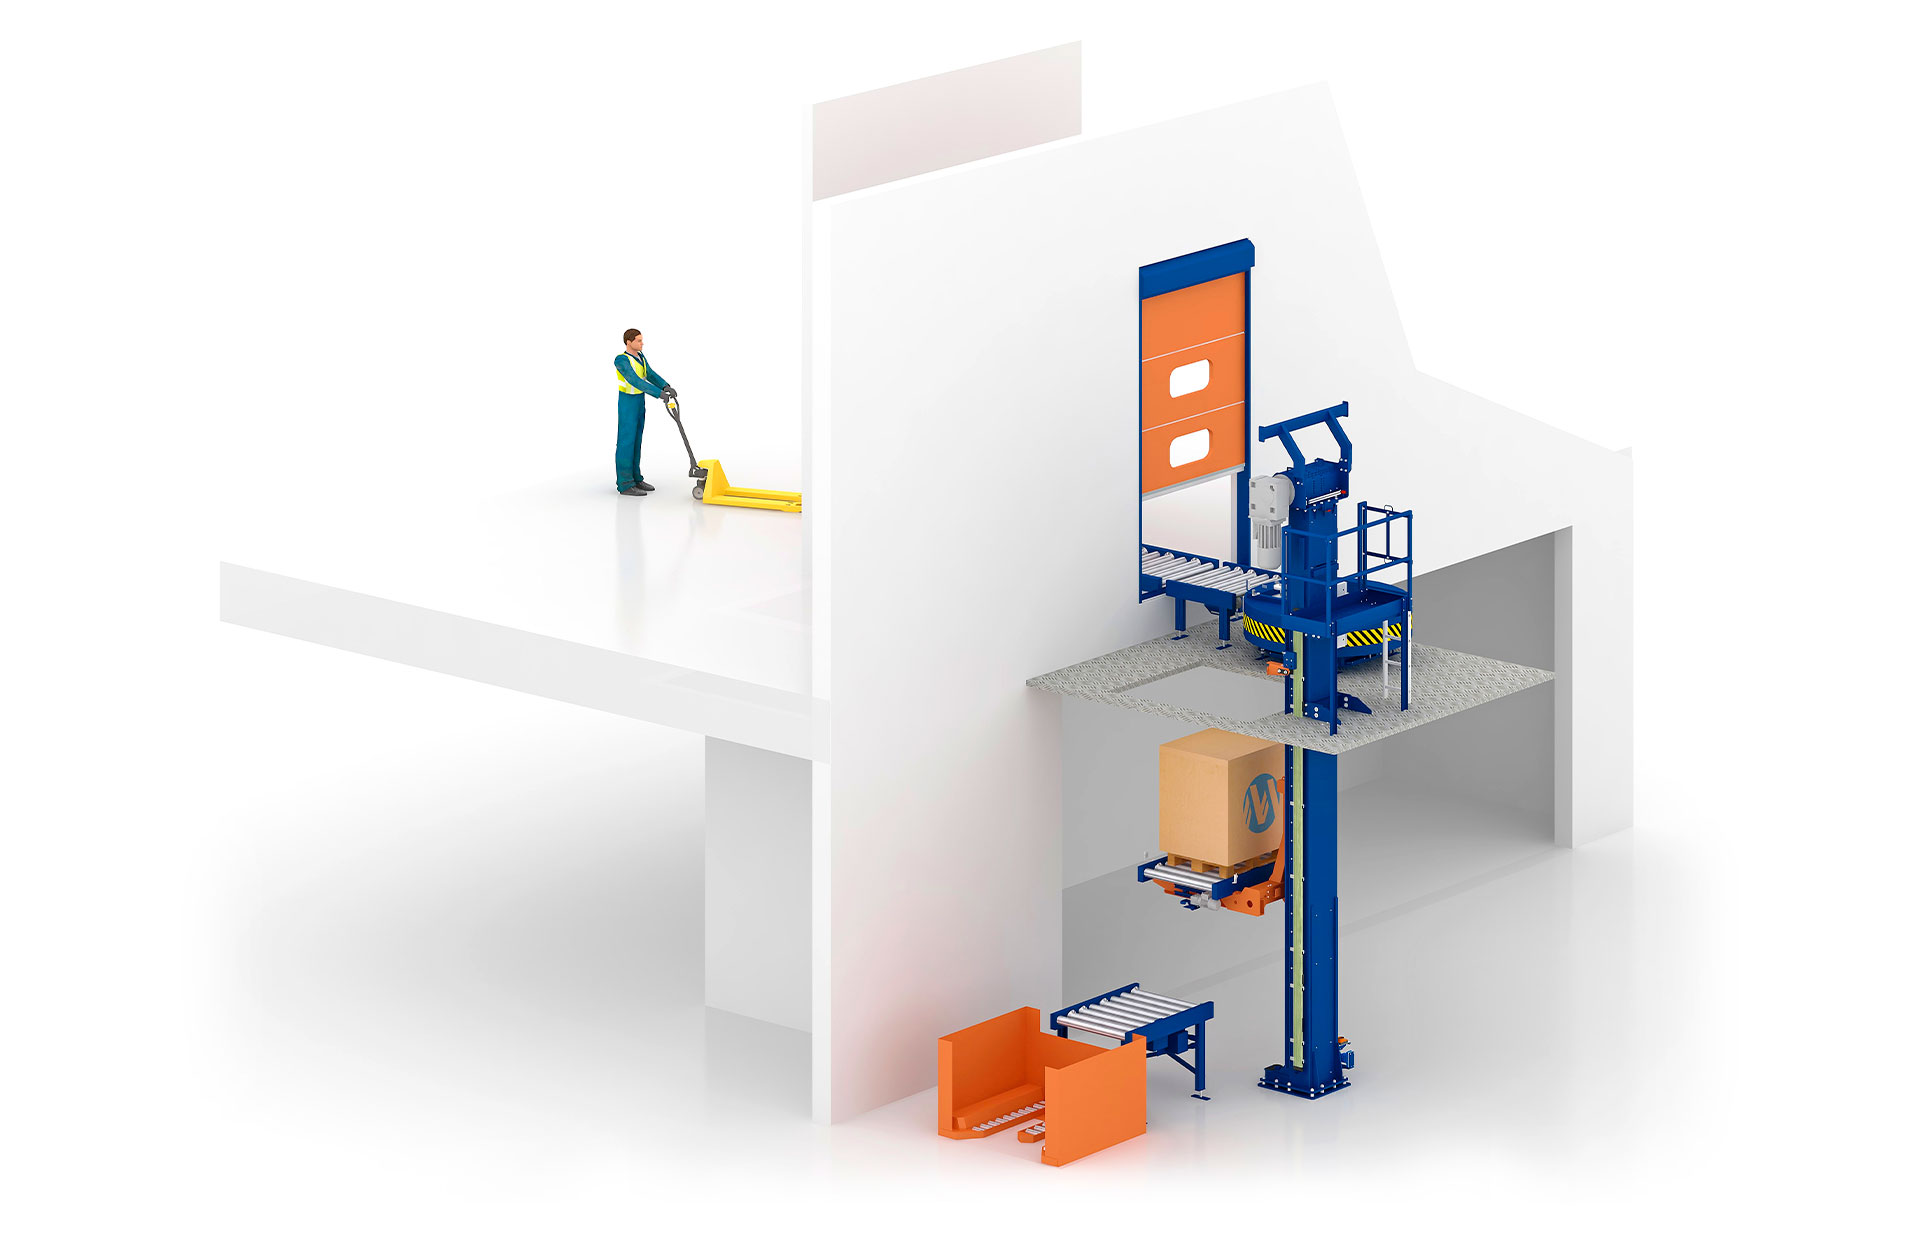 Pallet lift conveyors connect different levels quickly and effectively